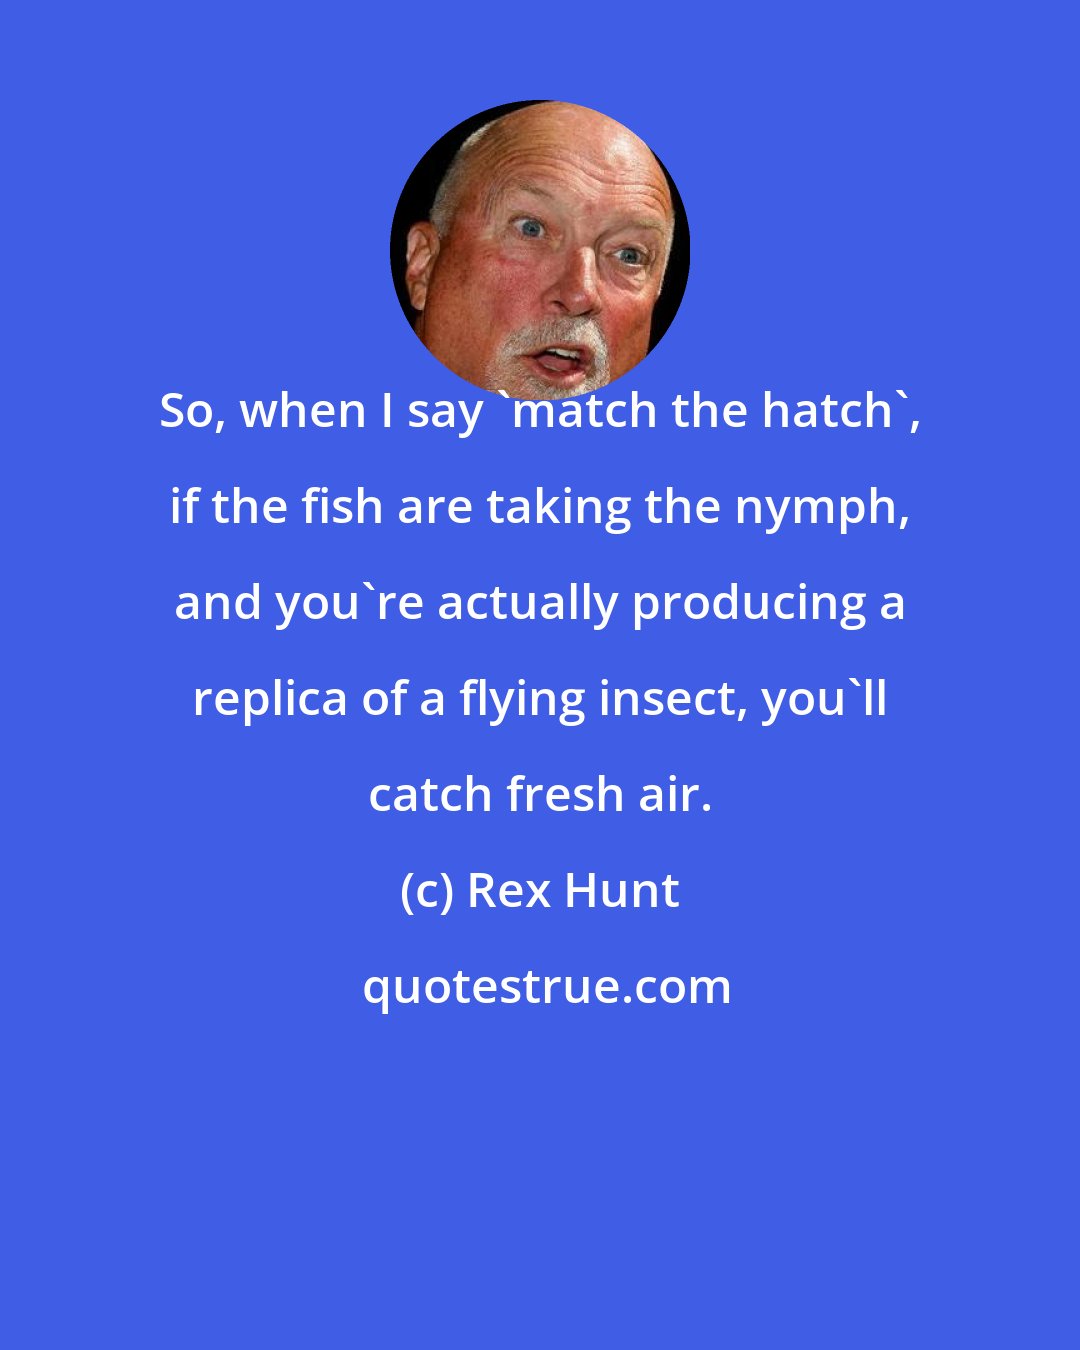 Rex Hunt: So, when I say 'match the hatch', if the fish are taking the nymph, and you're actually producing a replica of a flying insect, you'll catch fresh air.